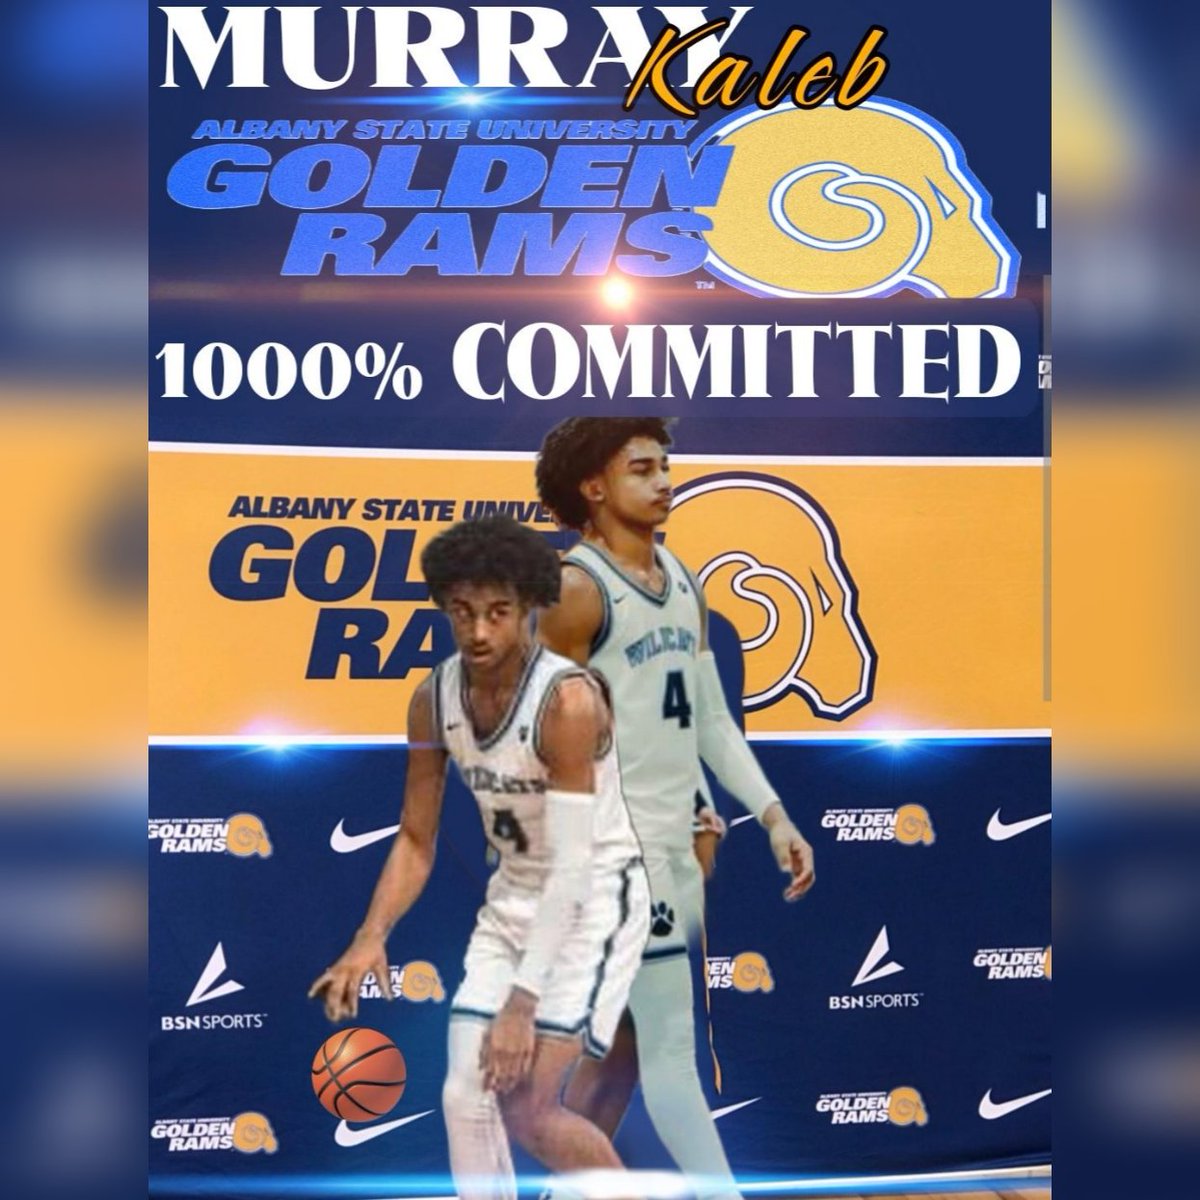 On to the next level. @kaleb4murray is 1000% committed to @ASUGoldenRamsMB Congratulations! Your hard work, skill, ambition, and dedication paid off. @king_david90 @coachadwhite